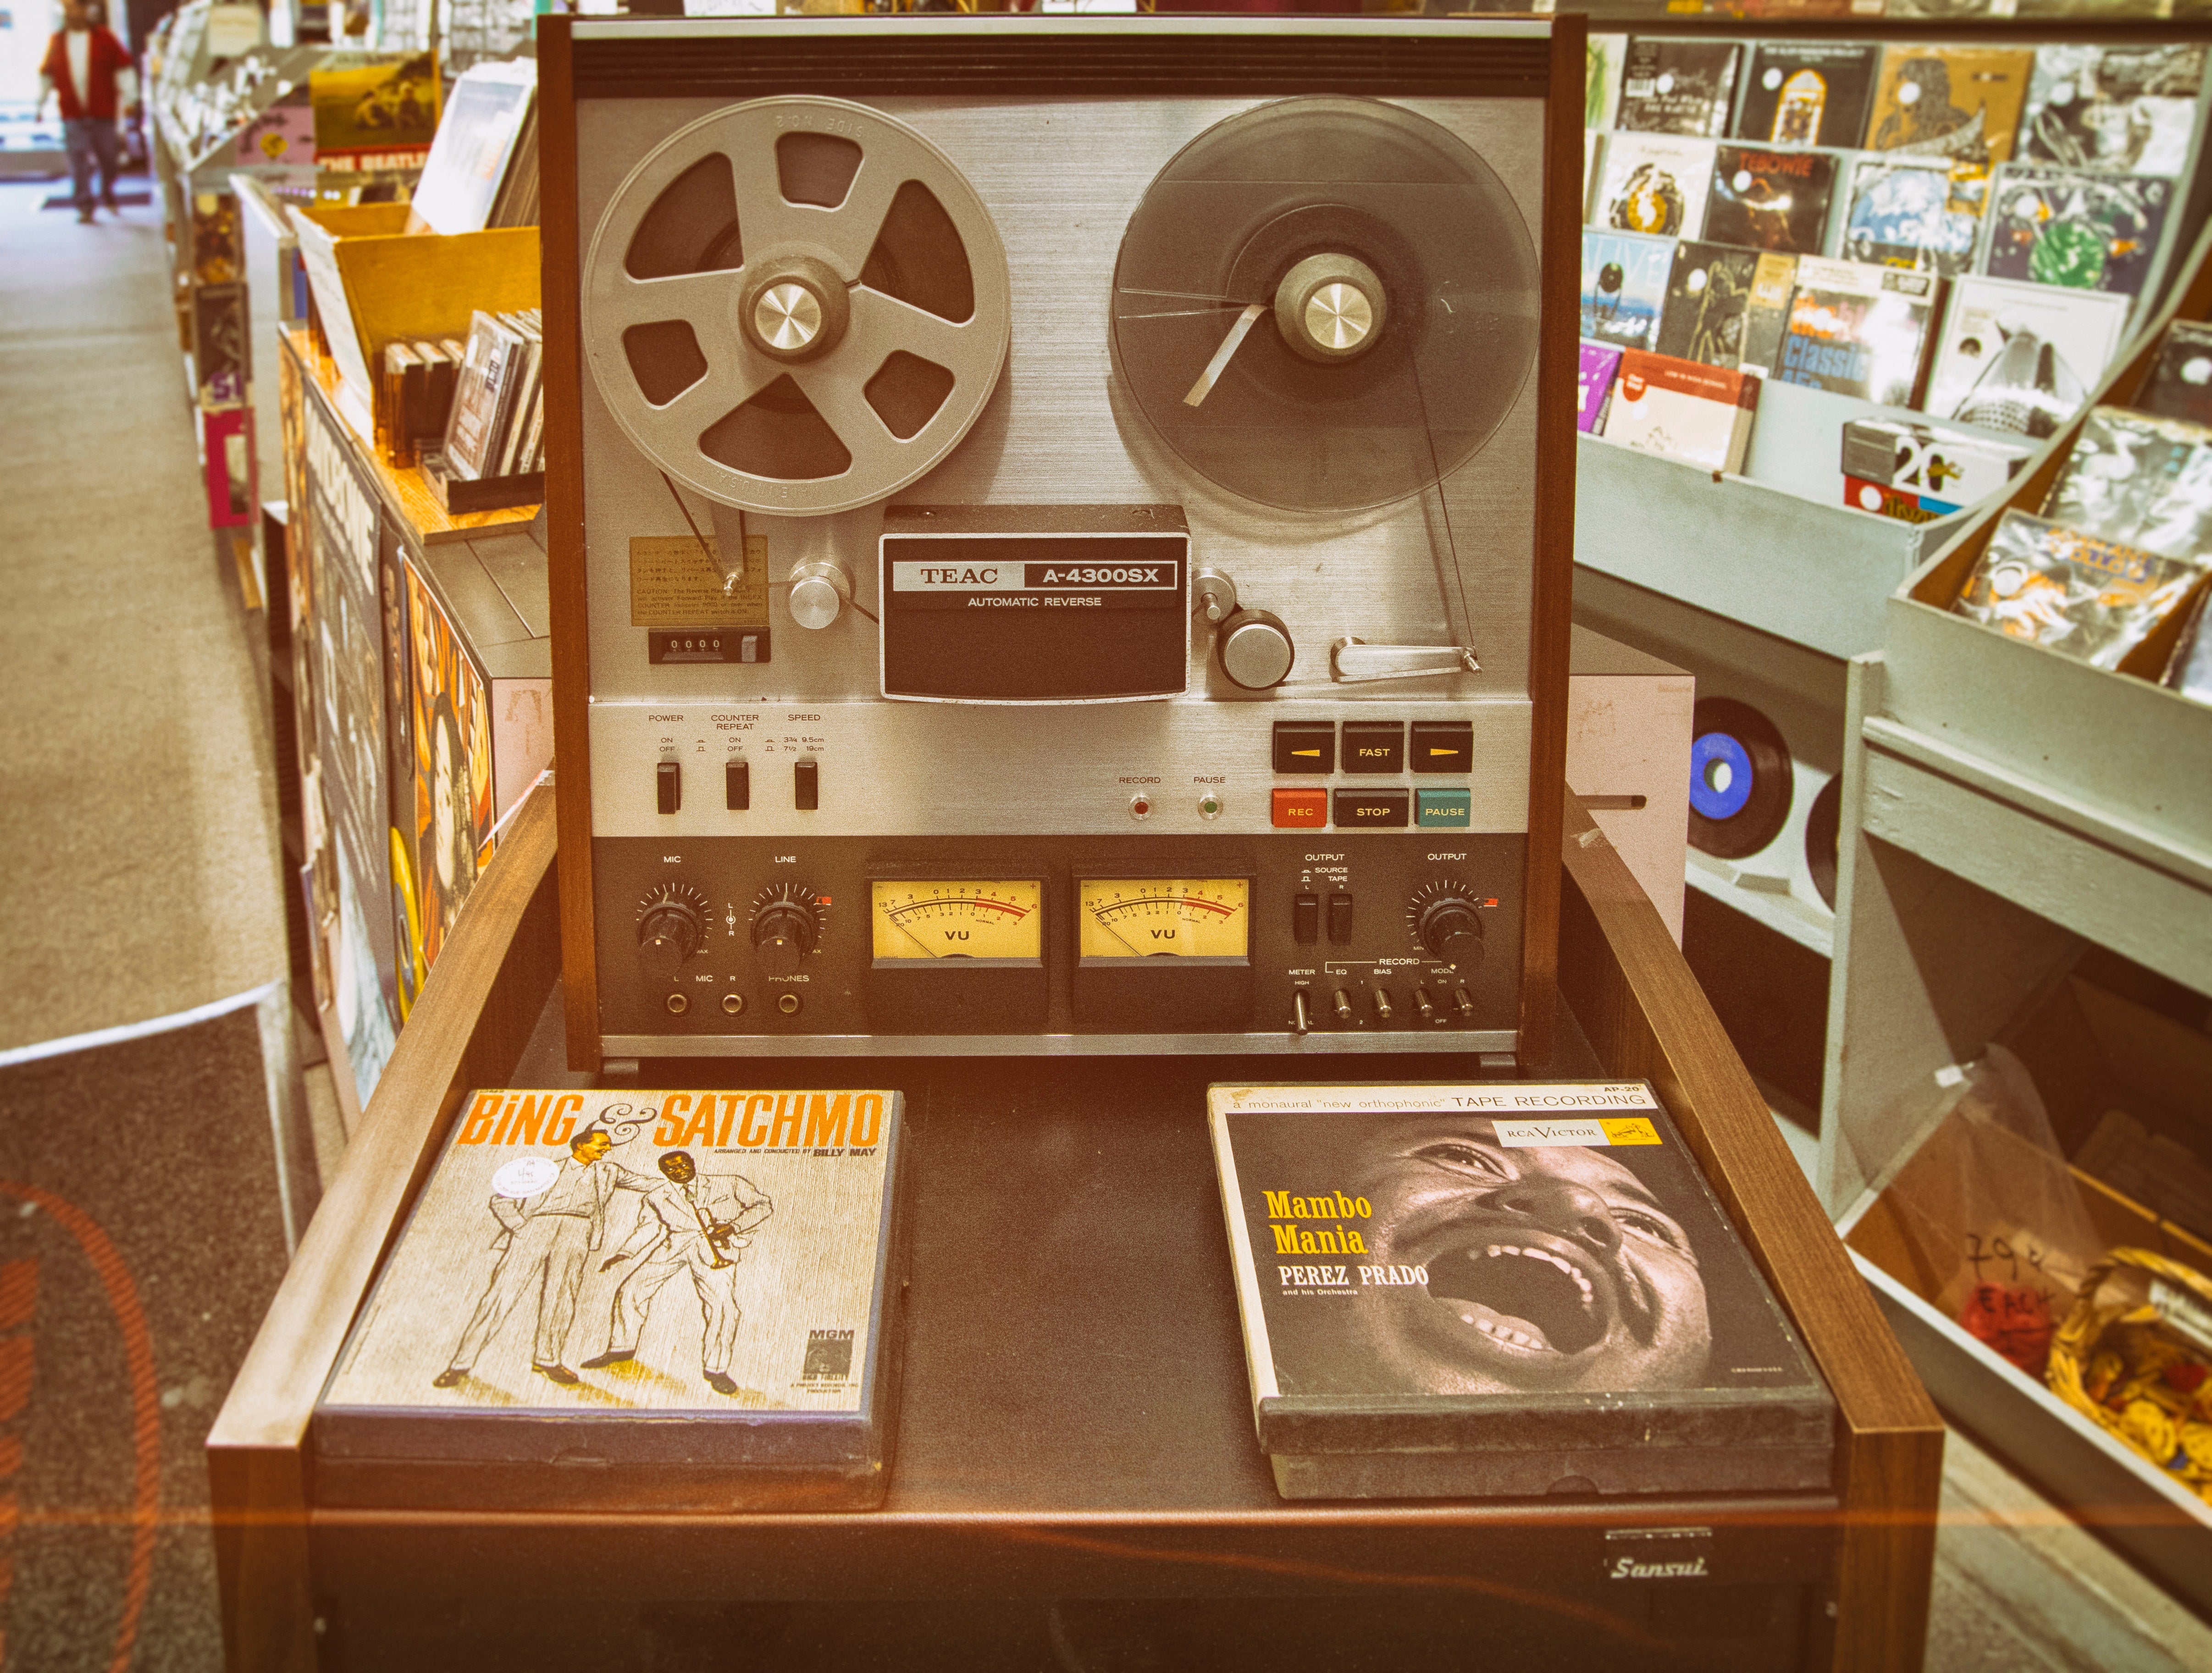 Reel to Reel Tape Recorder Manufacturers - Maxell - Museum of